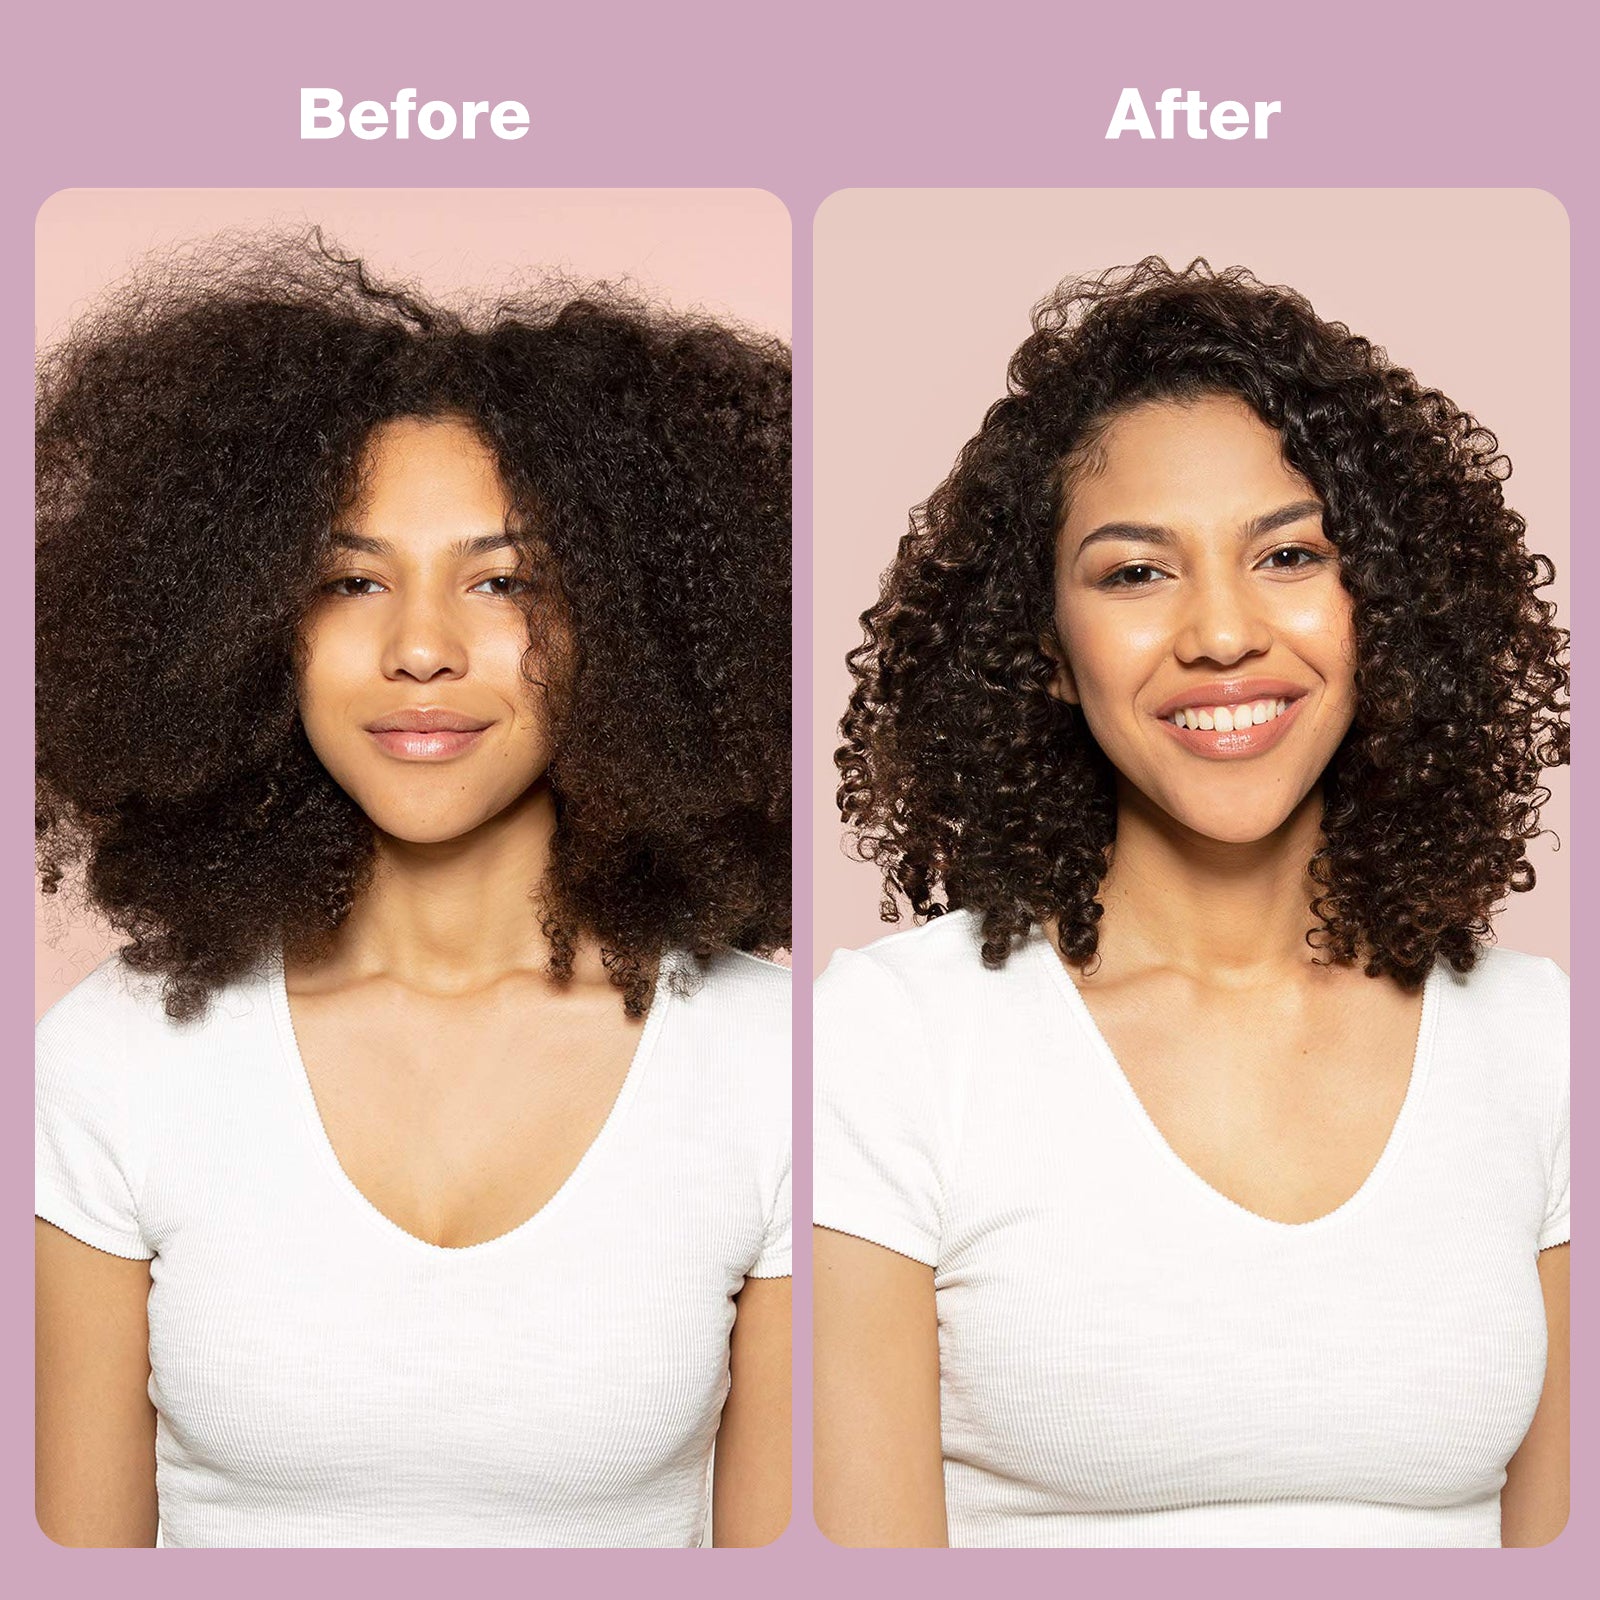 Diffuser Attachment for Wavy, Curly, Natural, and Frizzy Hair